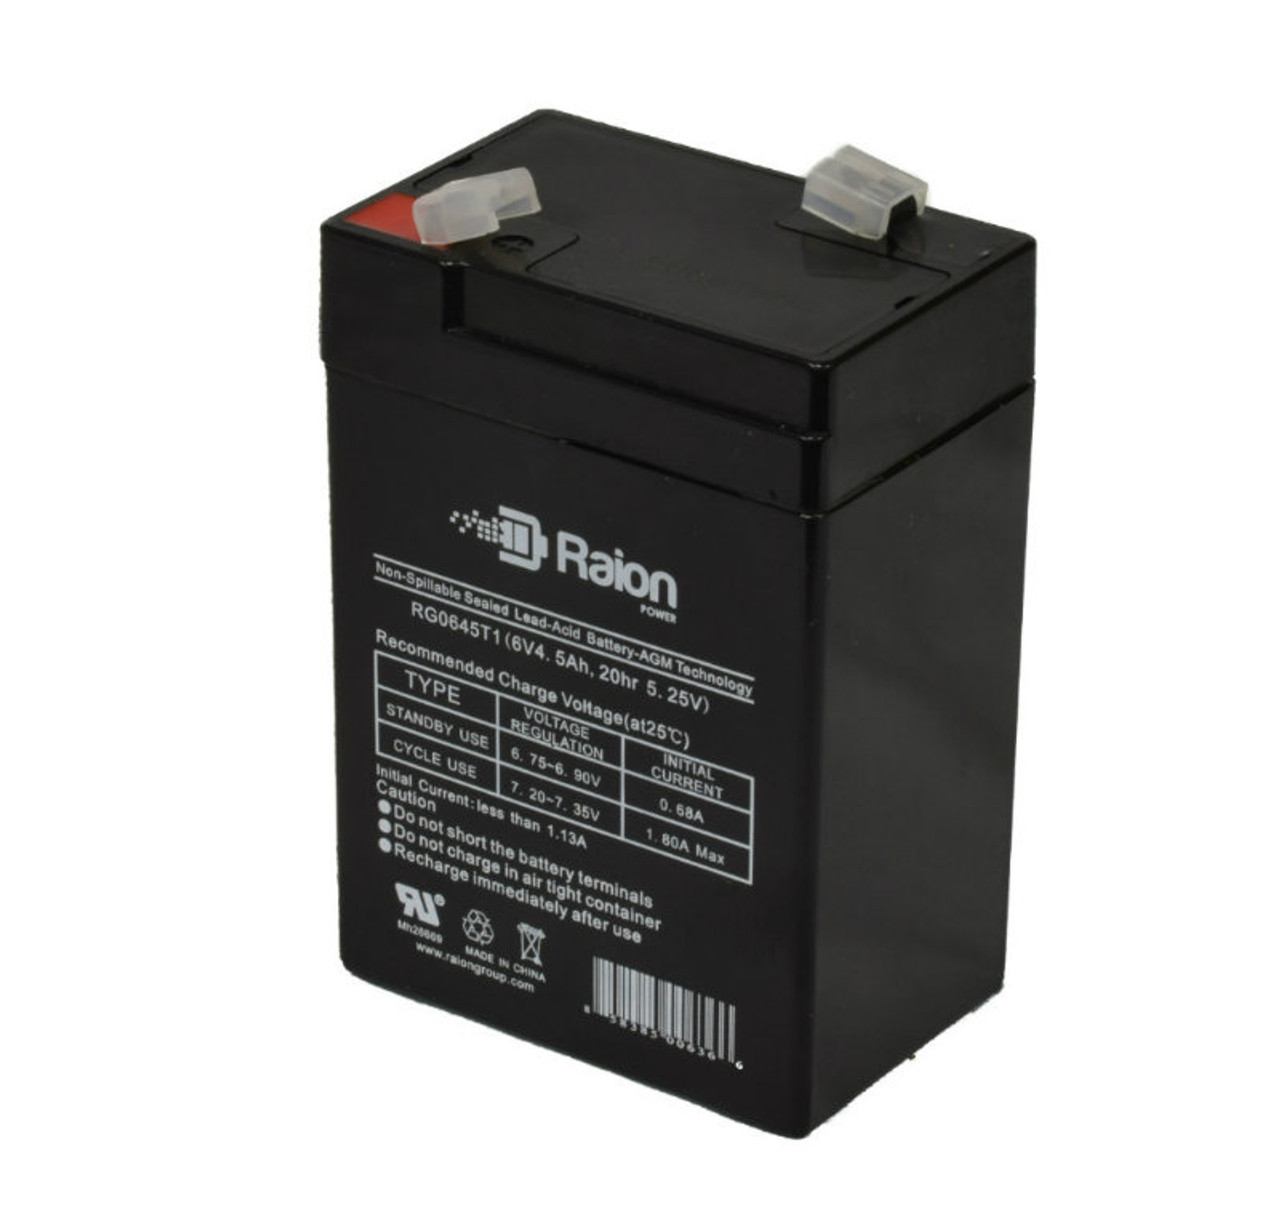 Raion Power RG0645T1 6V 4.5Ah Replacement Battery Cartridge for Chloride ERS3